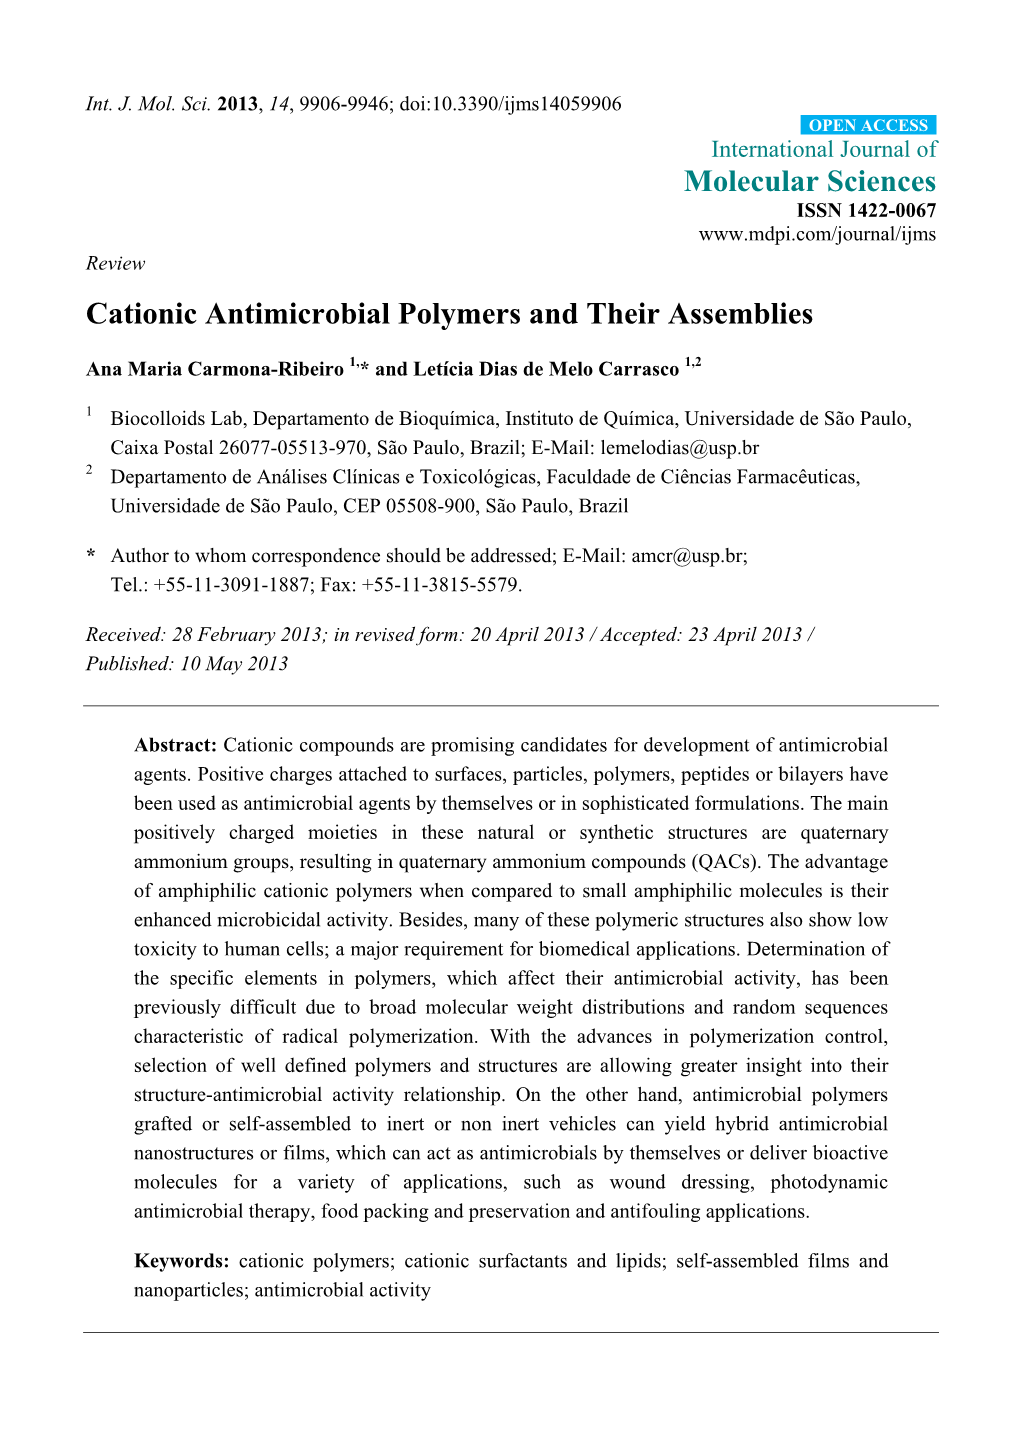 Molecular Sciences Cationic Antimicrobial Polymers and Their